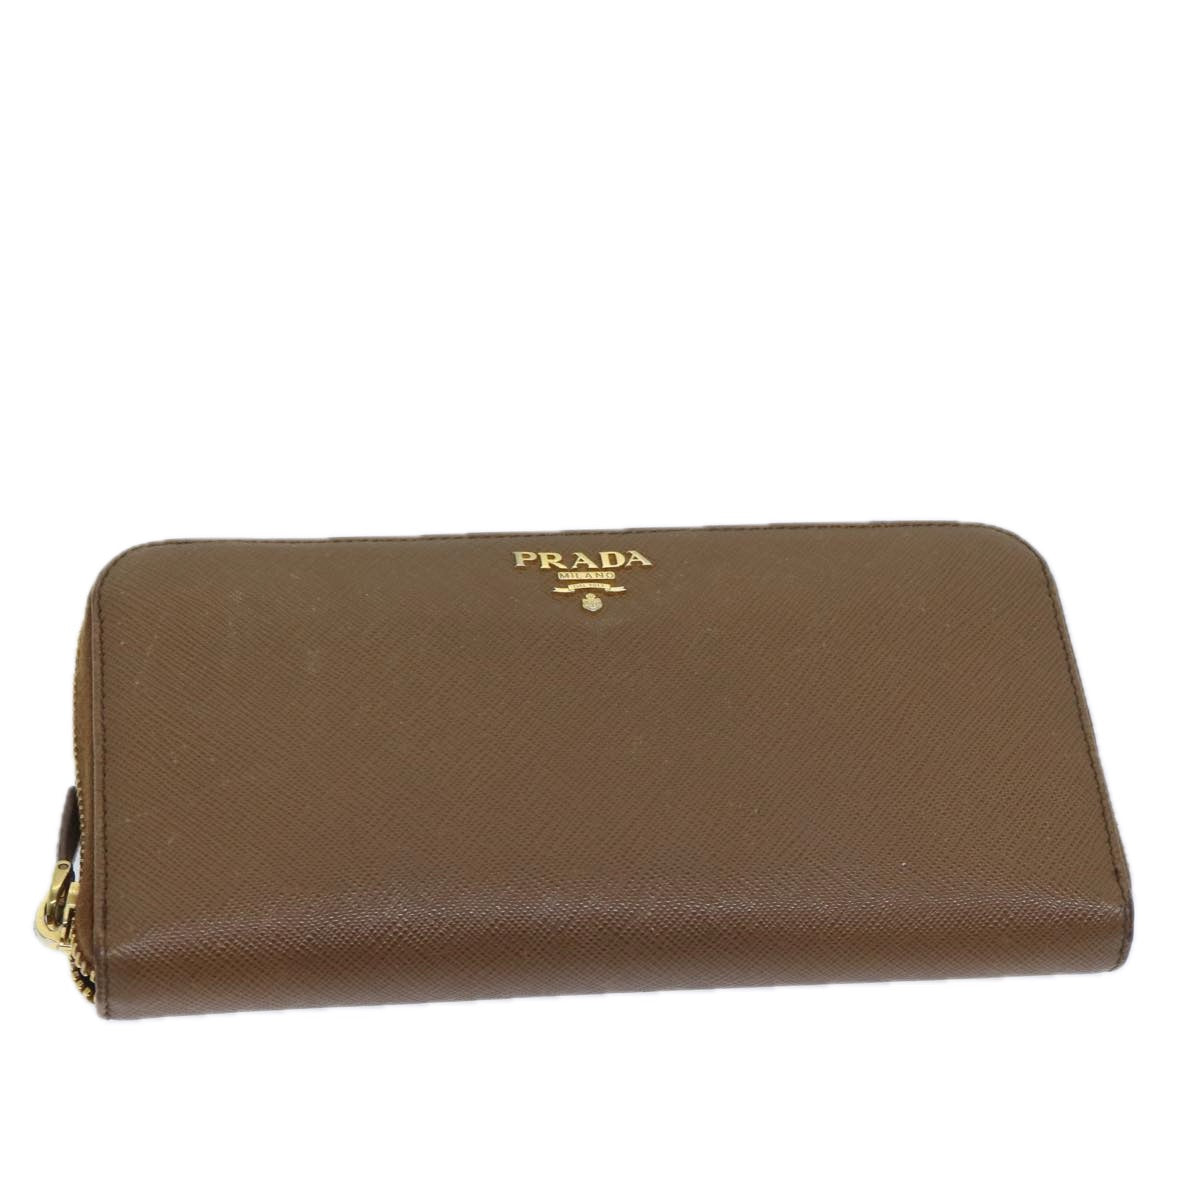 PRADA Long Wallet Safiano leather Brown Auth ep3921